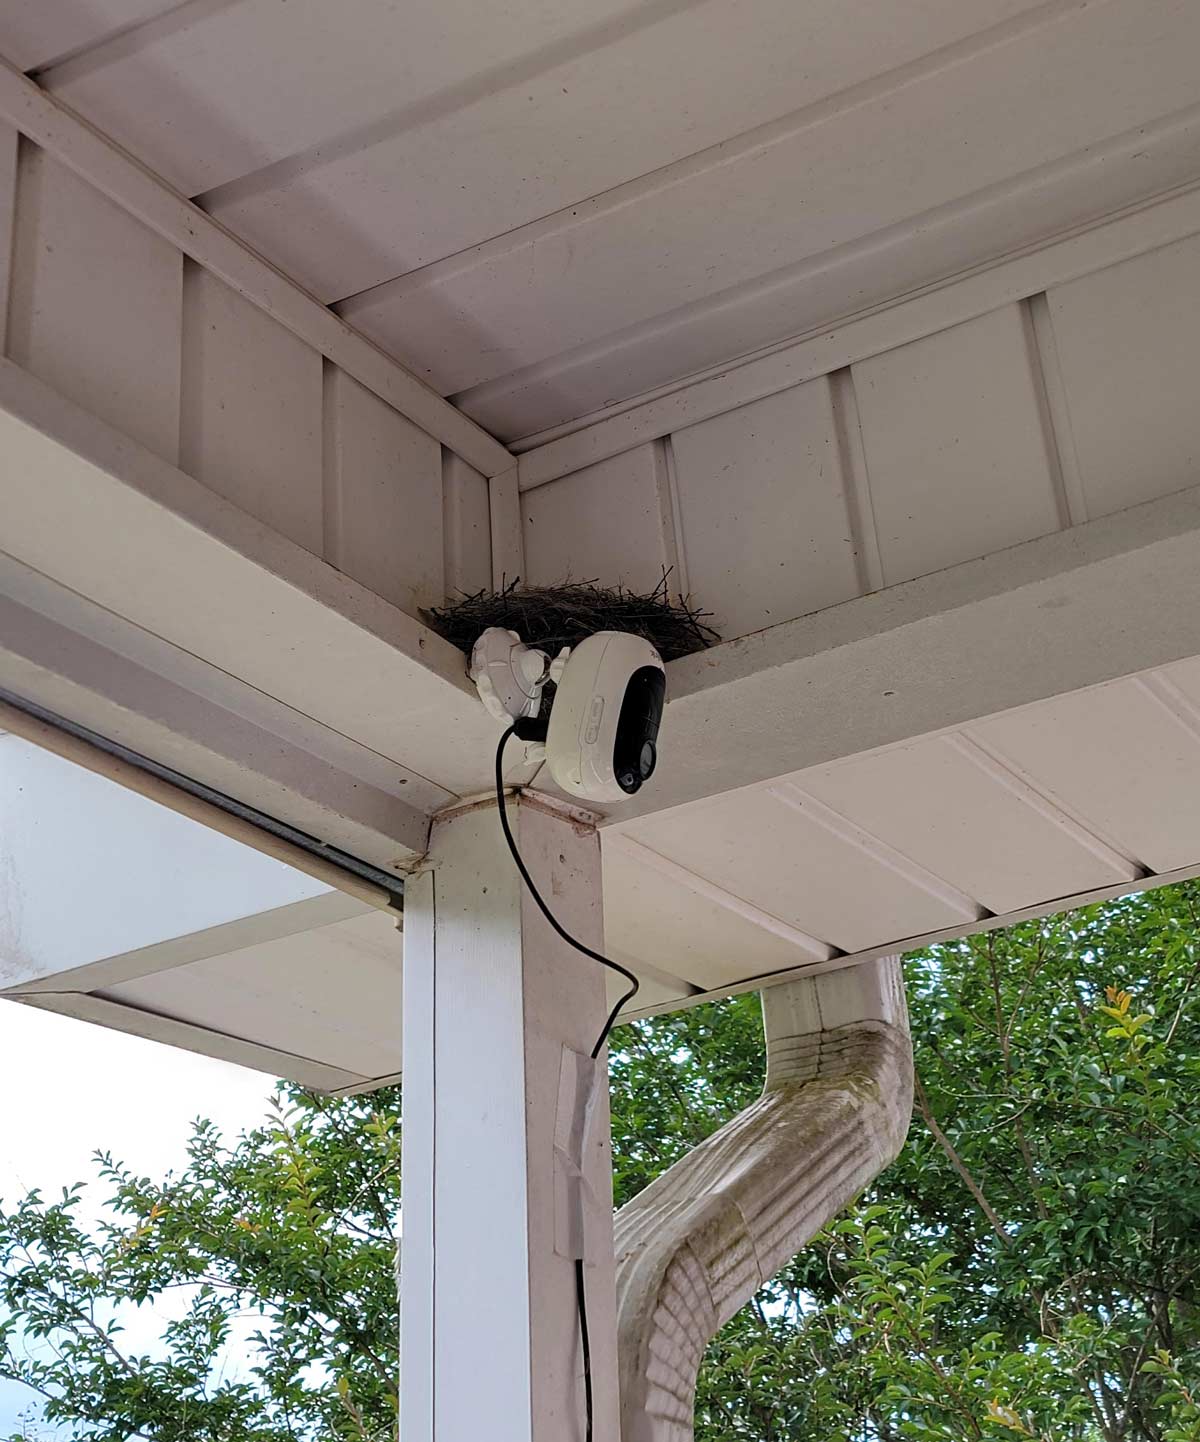 I guess it's a nest camera now